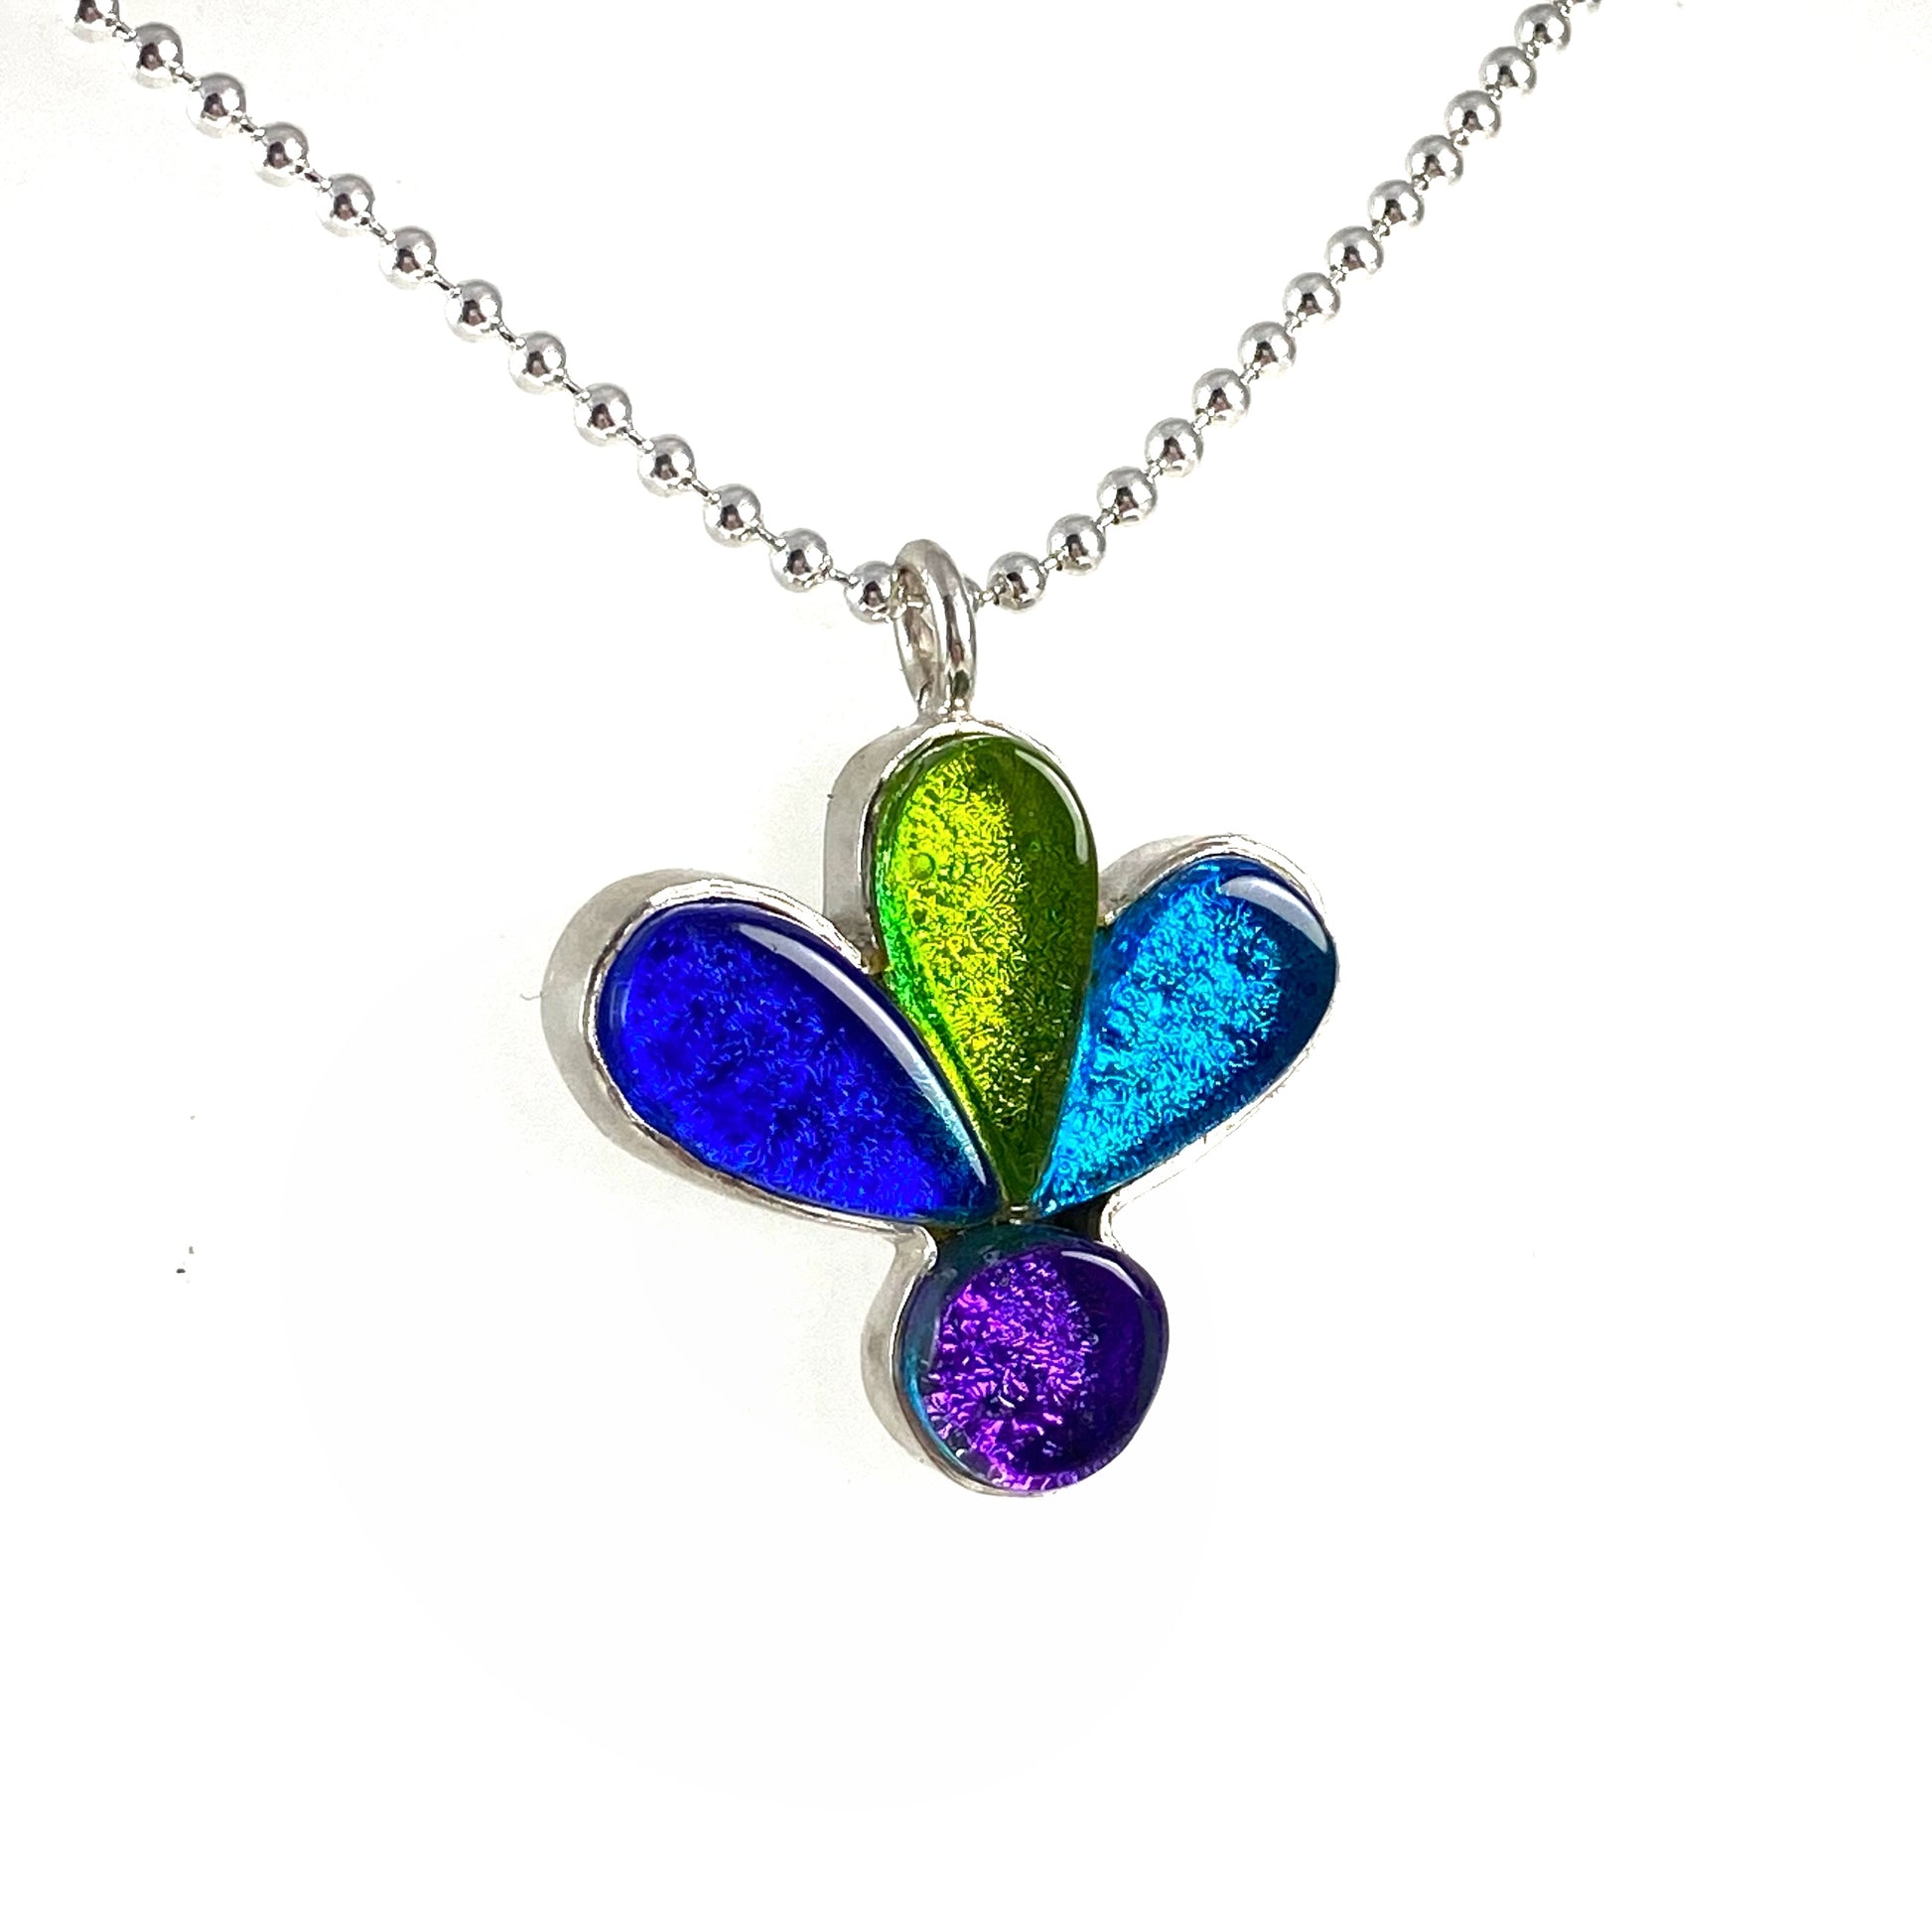 blossom flower necklace, blue, green, purple, fused glass, glass jewelry, glass and silver jewelry, handmade, handcrafted, American Craft, hand fabricated jewelry, hand fabricated jewellery, Athen, Georgia, colorful jewelry, sparkle, bullseye glass, dichroic glass, art jewelry